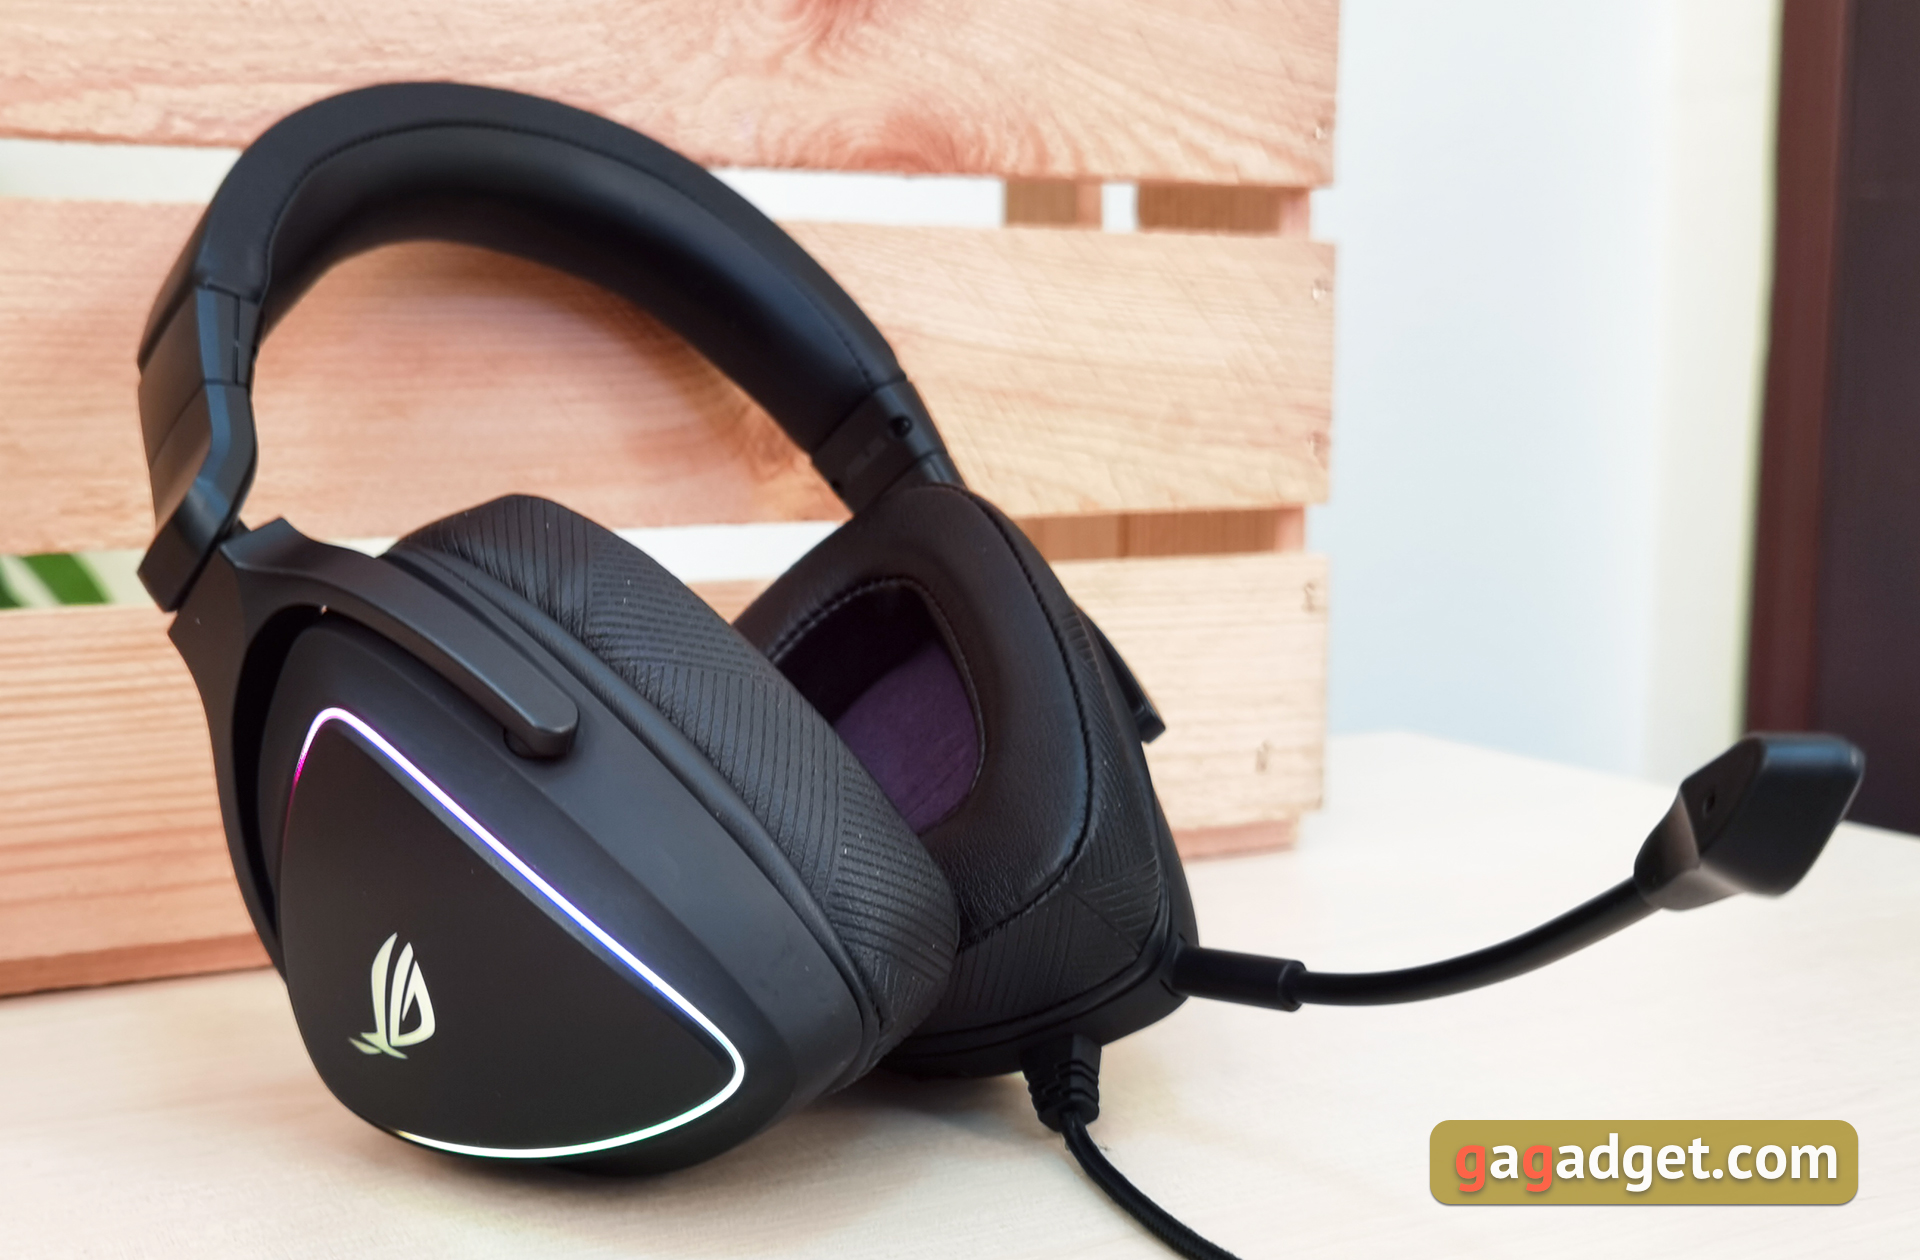 Asus ROG Delta S Review: Clean, Crisp Sound From Gaming to Music